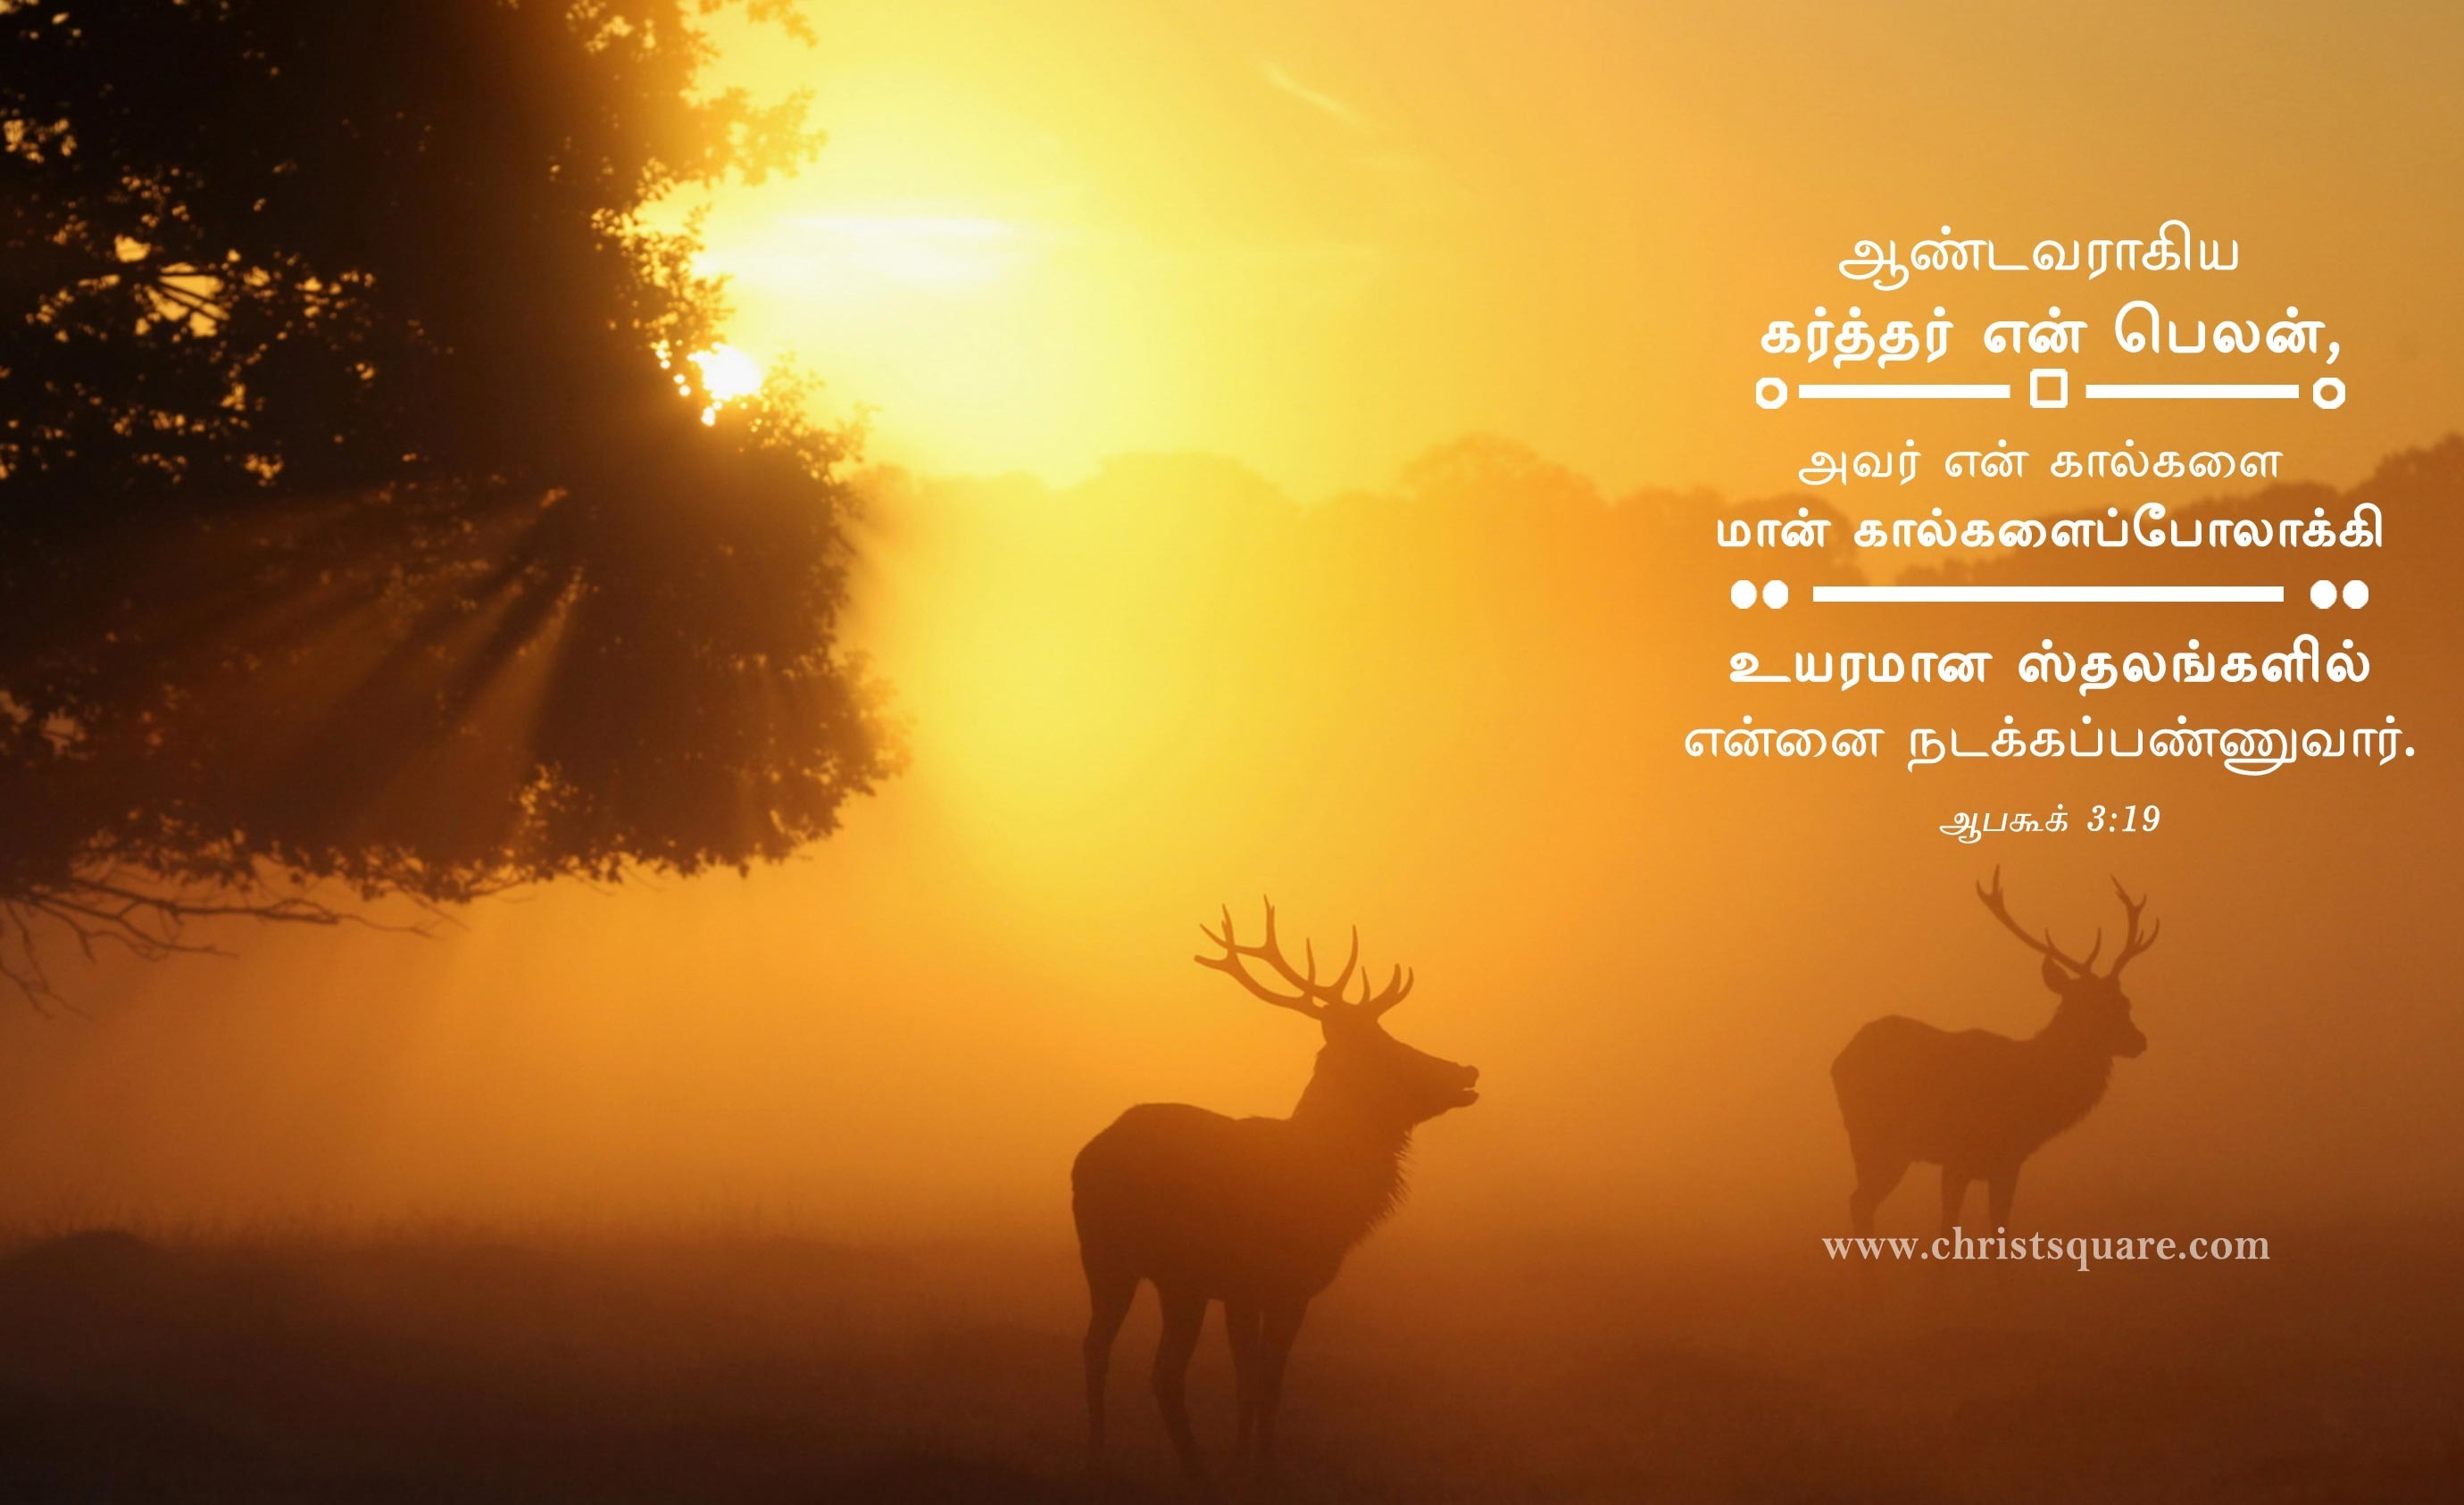 2760x1686  Jesus Christ Wallpaper With Bible Verse In Tamil - Ma-aM